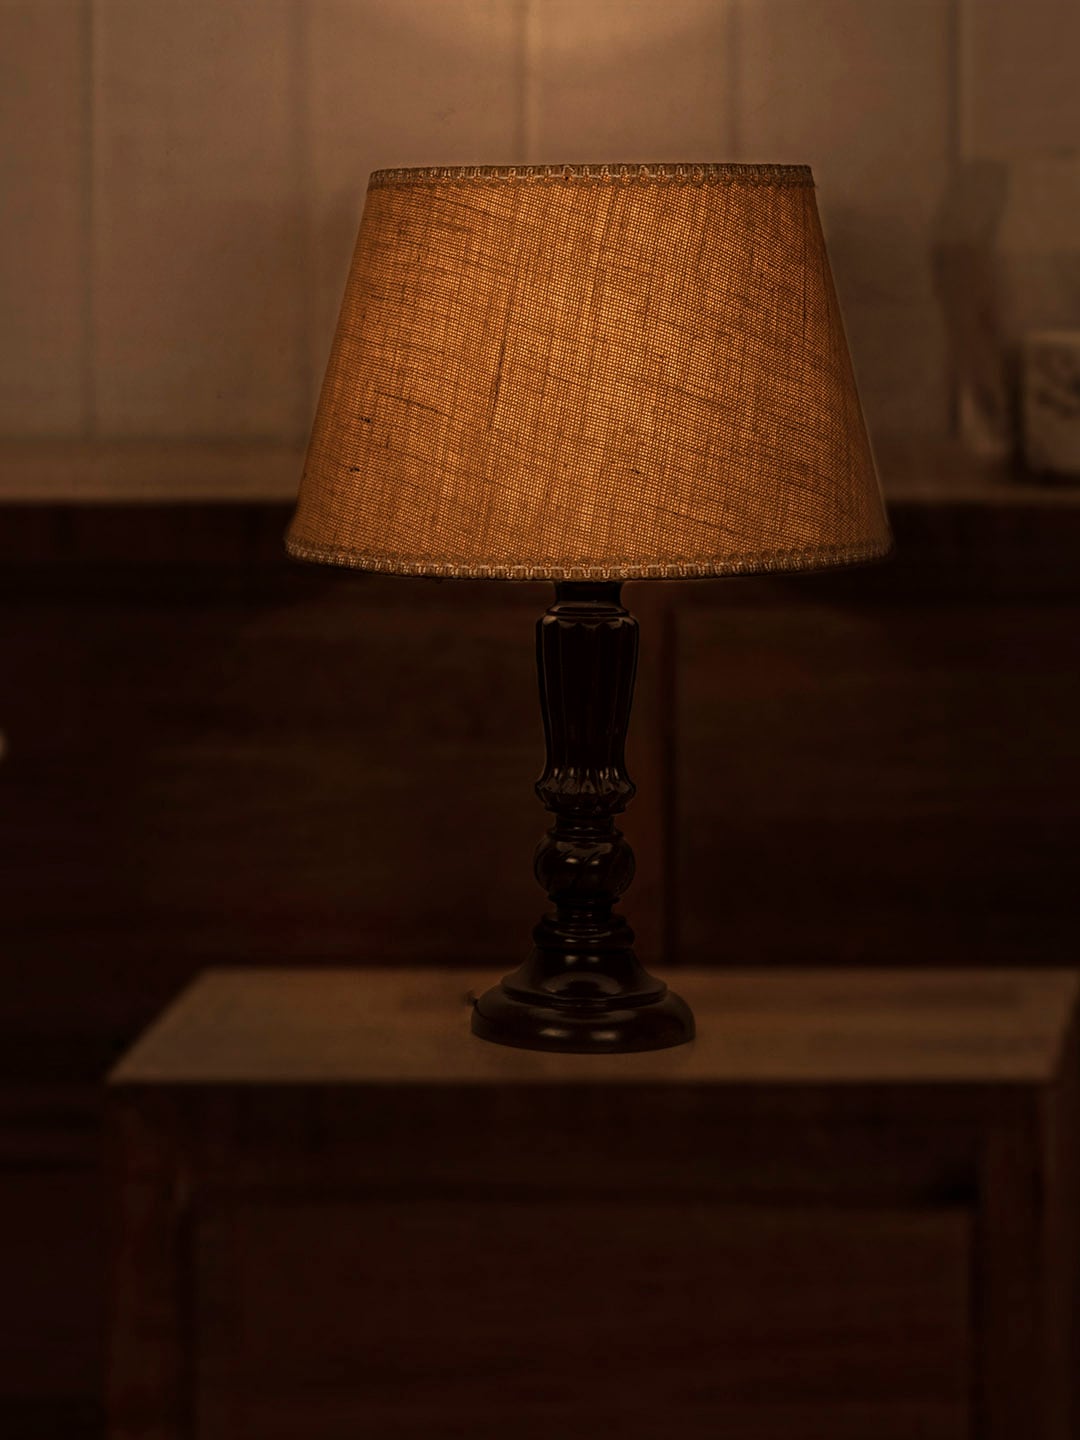 Fos Lighting Lamp Brown Textured Bedside Standard Table Lamp With Fabric Shade Price in India